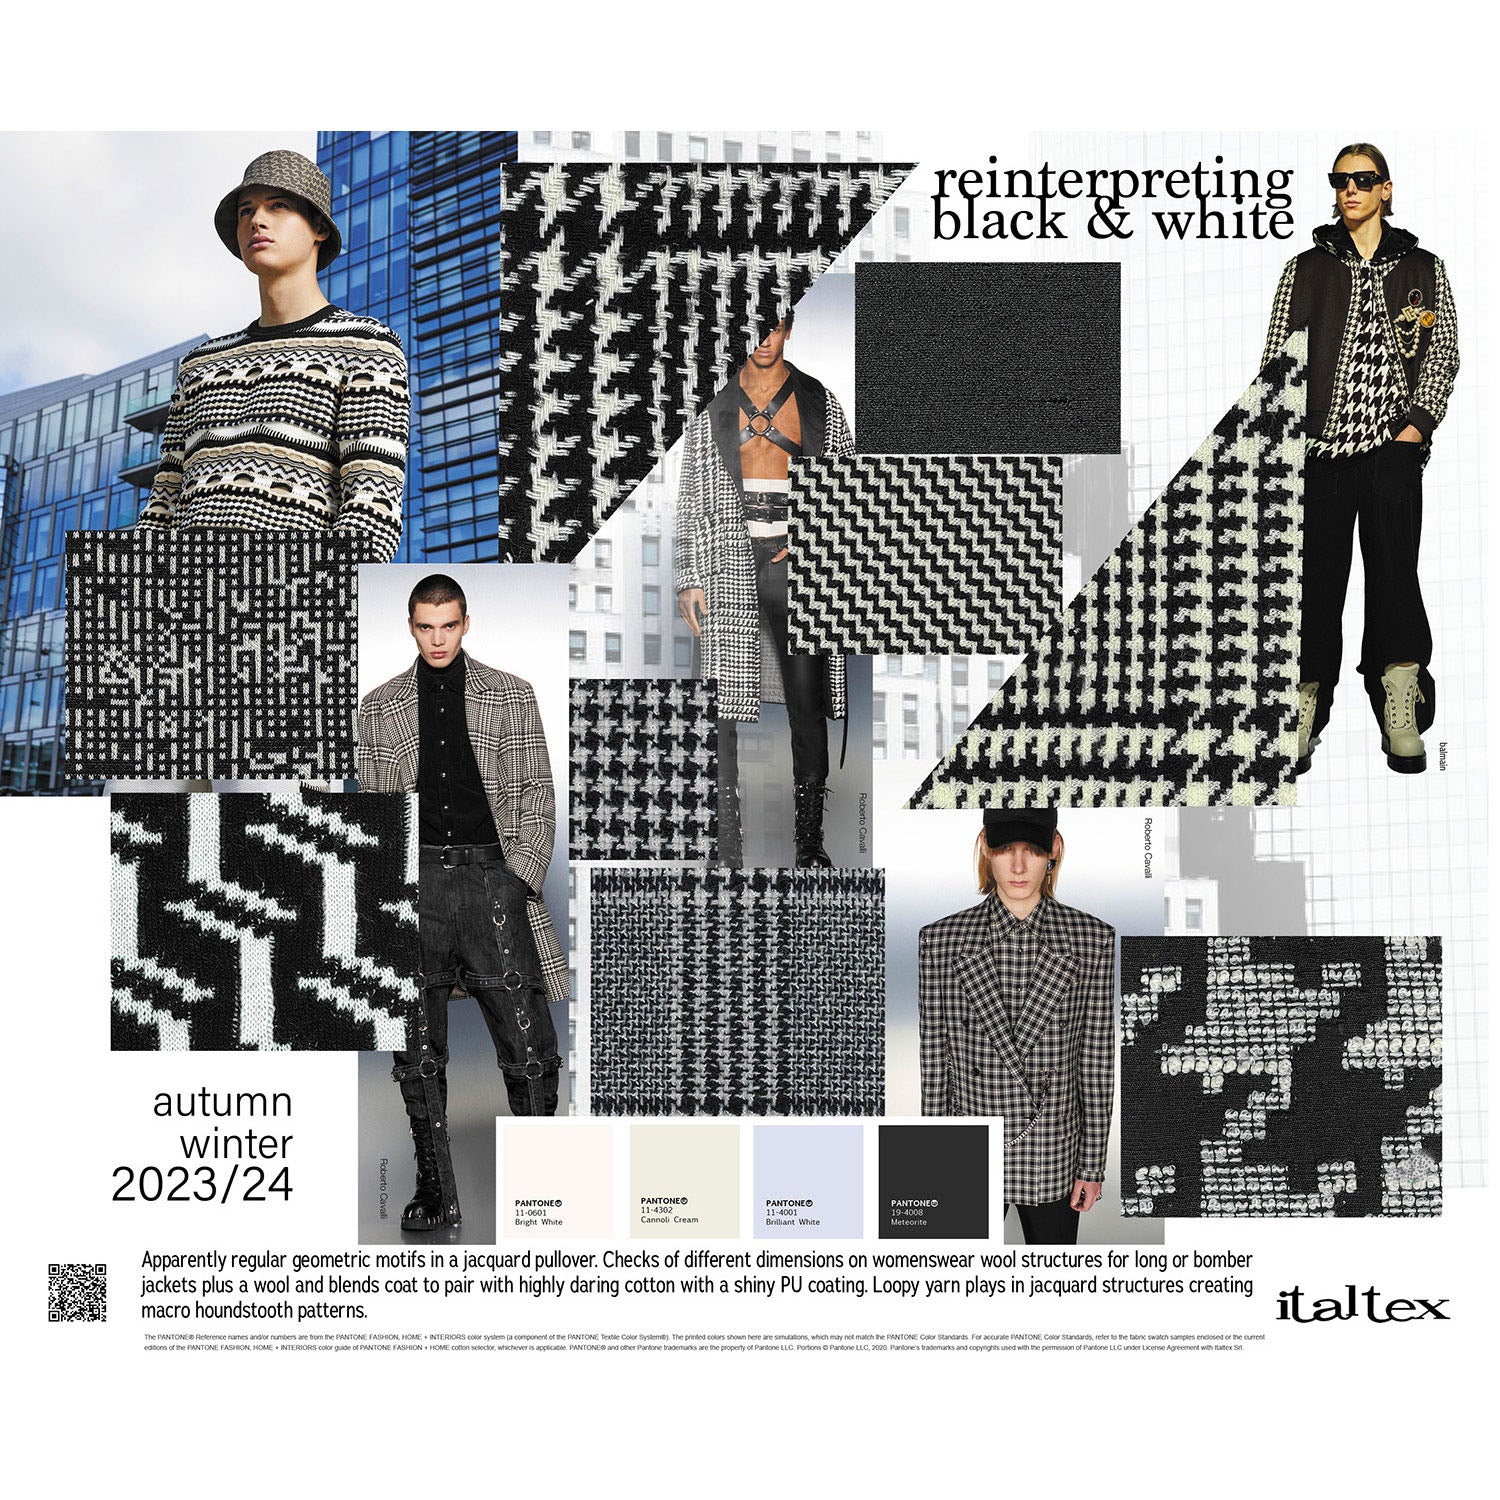 Men's wear fashion directions for Autumn/Winter 2023/24: apparently regular geometric motifs in a jacquard pullover. Checks of different dimensions on womenswear wool structures for long or bomber jackets plus a wool and blends coat to pair with highly daring cotton with a shiny PU coating. Loopy yarn plays in jacquard structures creating macro houndstooth patterns